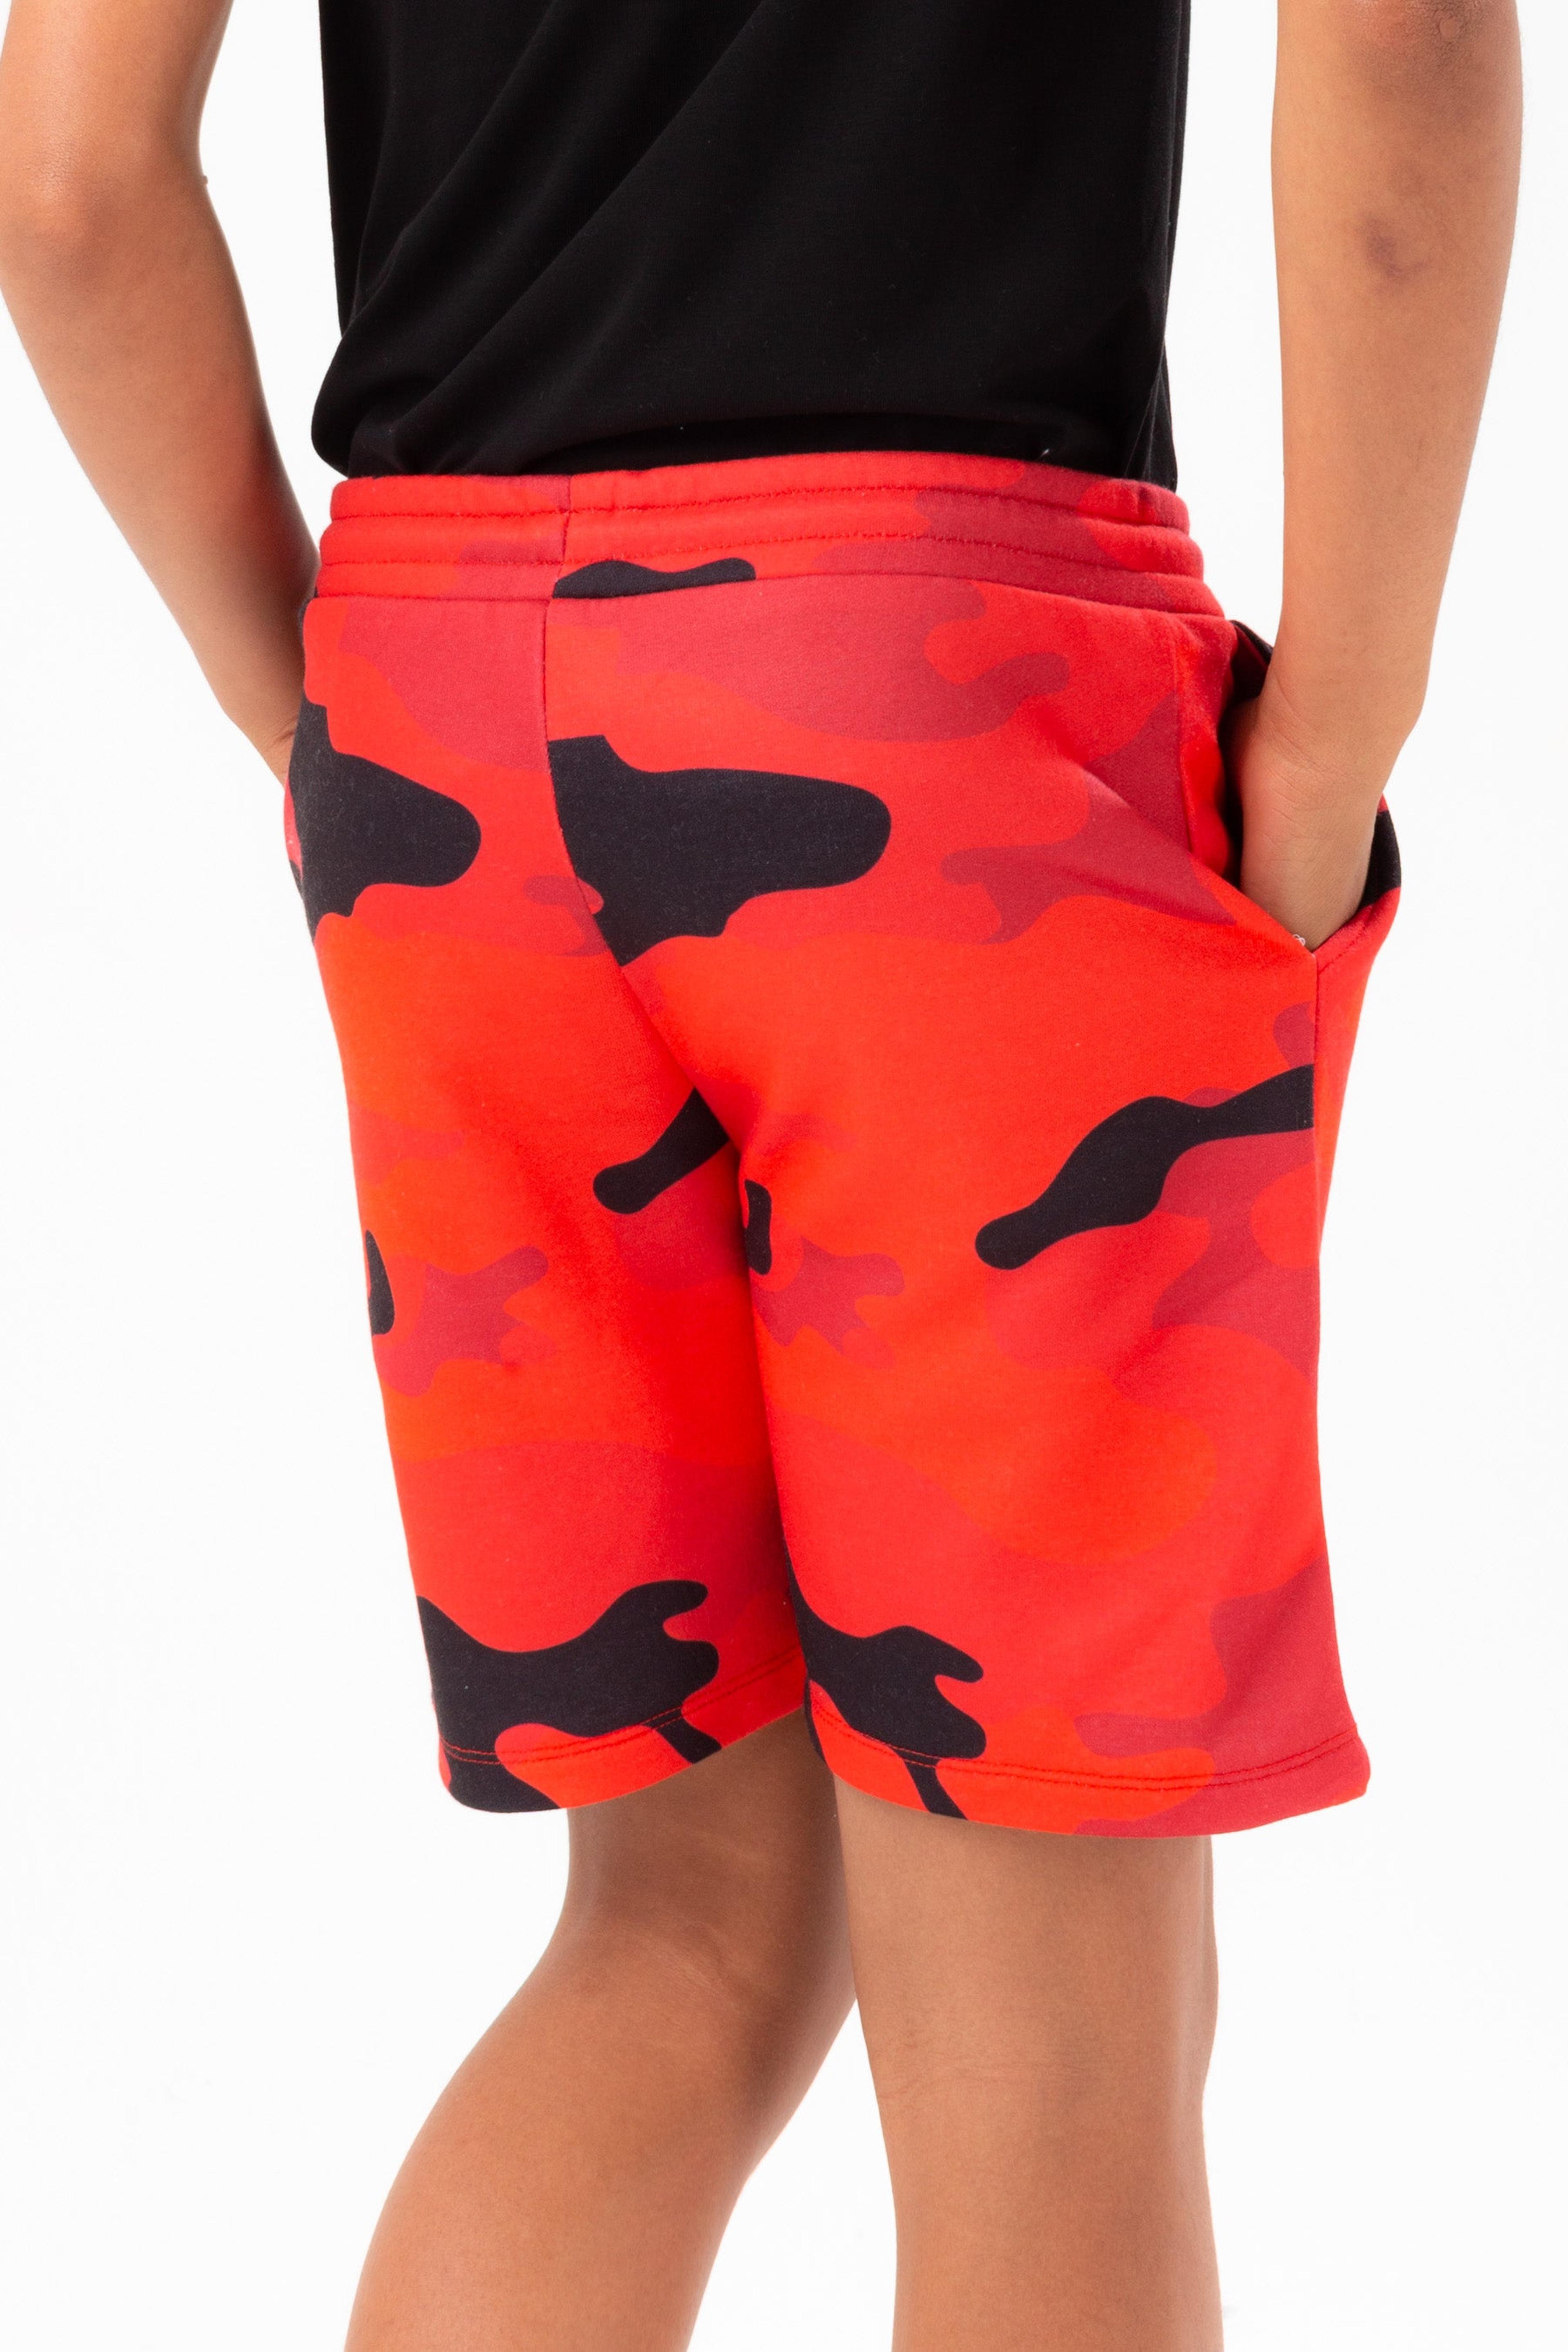 Alternate View 1 of HYPE BOYS RED CAMO SCRIPT SHORTS